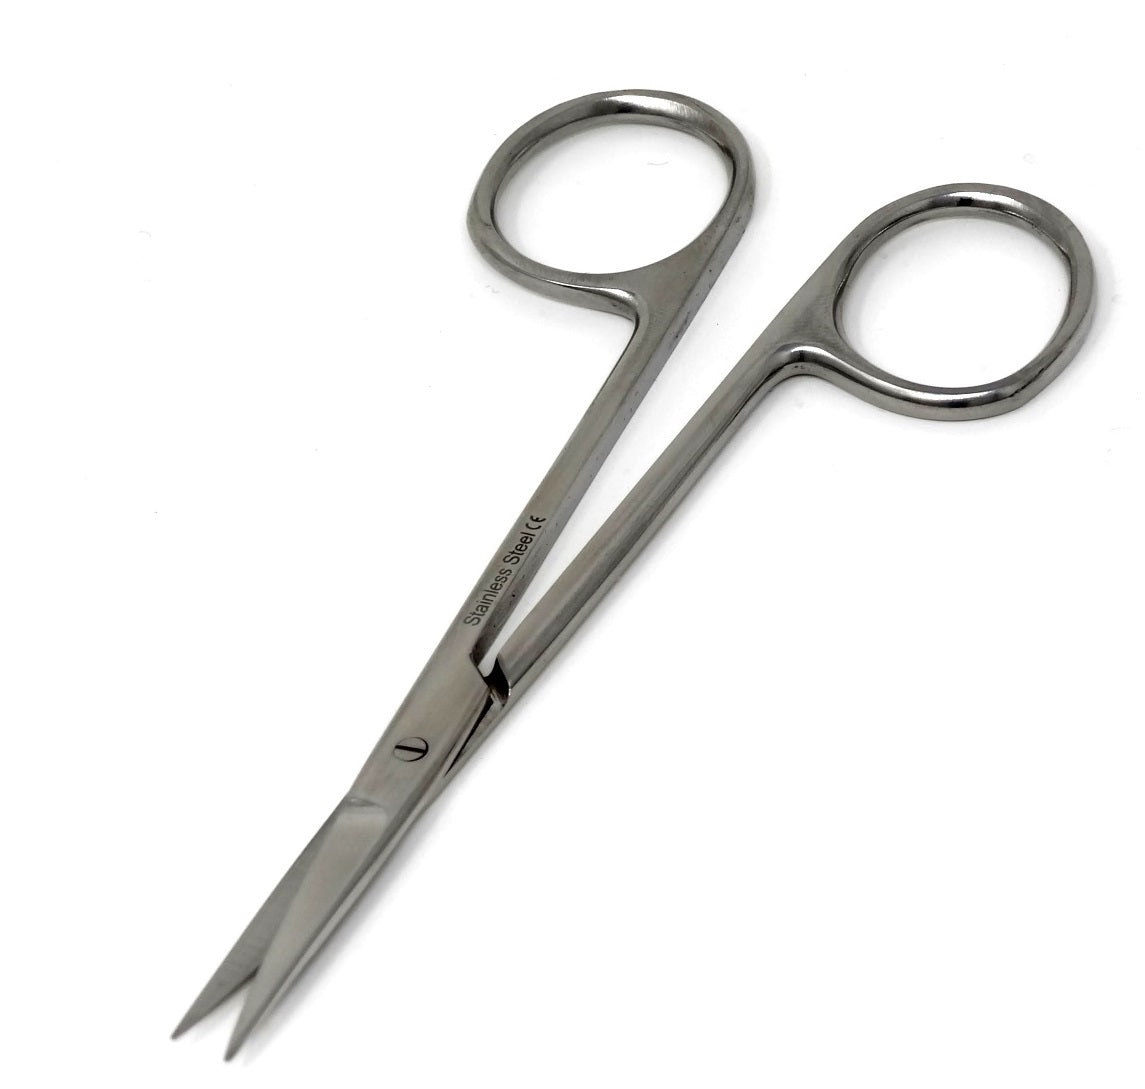 4.5" Sharp Straight Tip Craft Applique Embroidery Scissors, Stainless Steel Thread Clippers